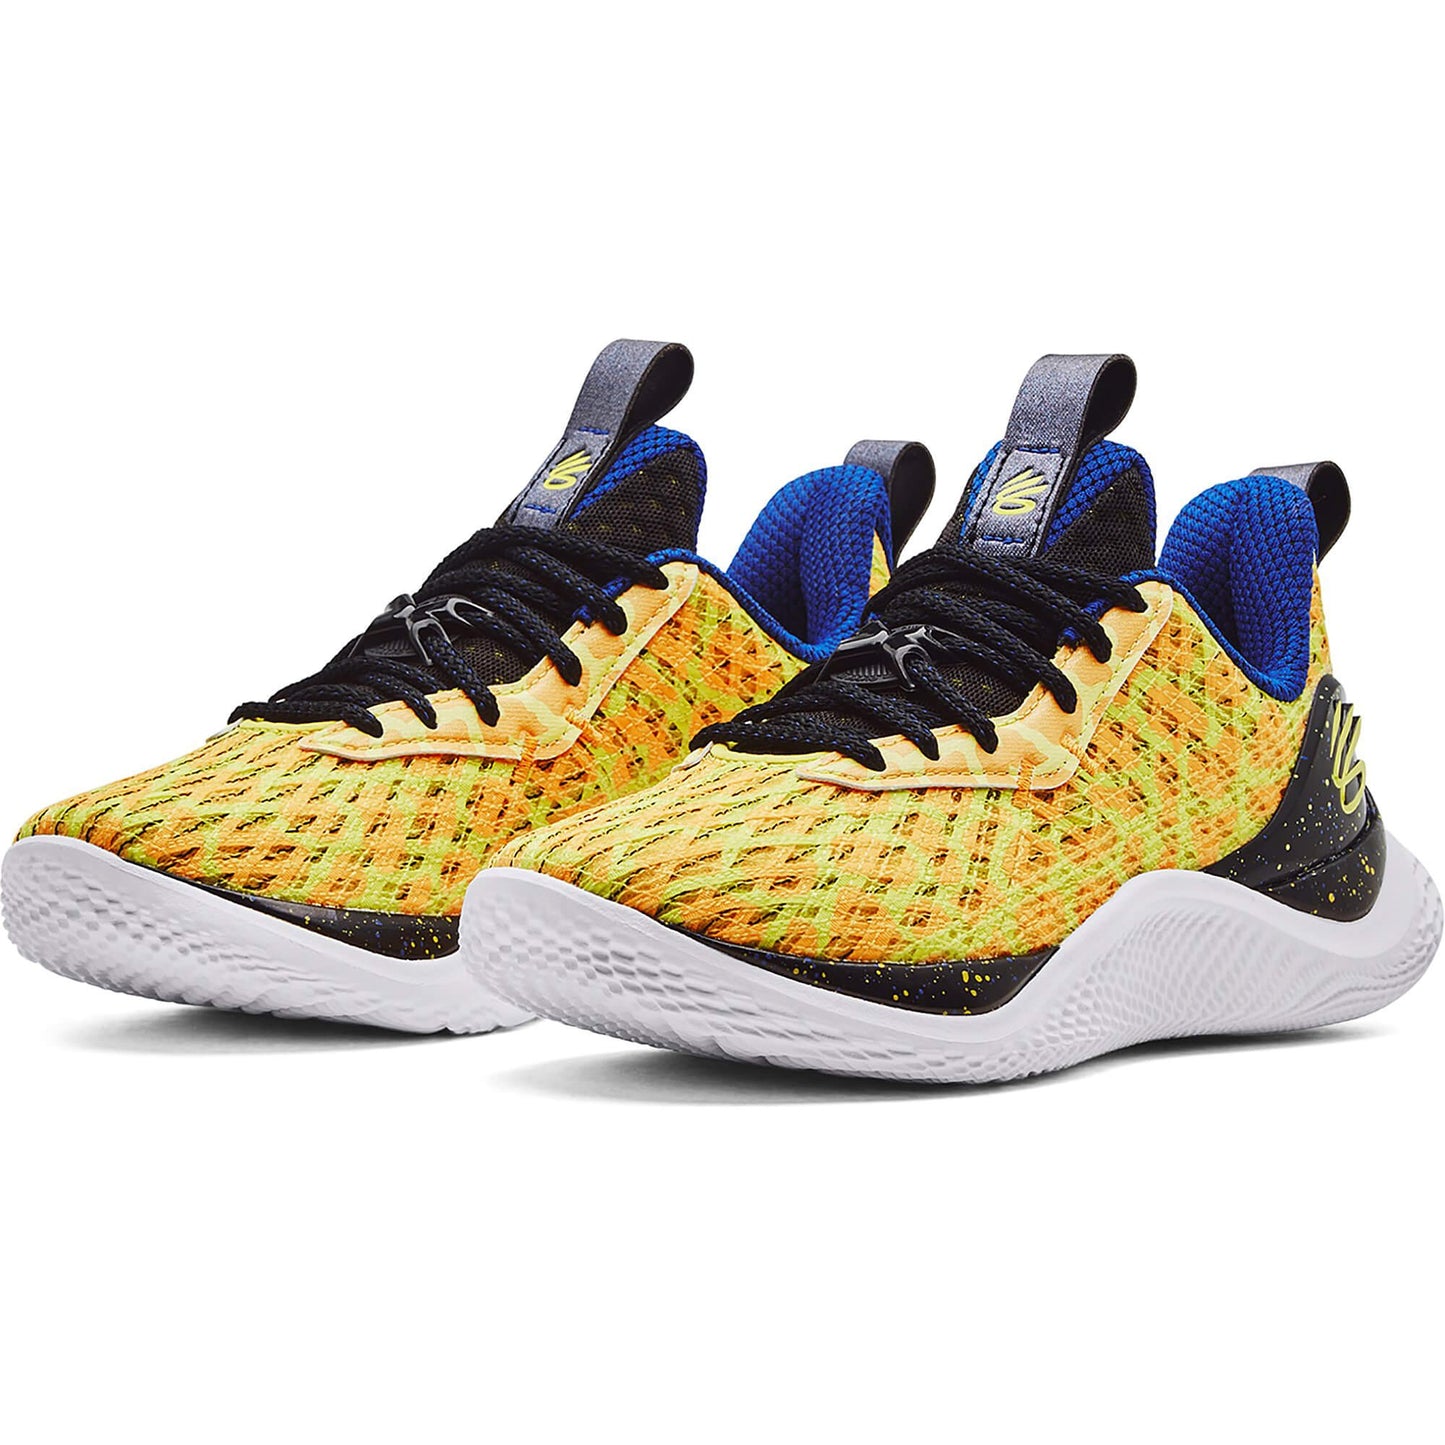 Under Armour Grade School Curry Flow 10 'Double Bang' Basketball Shoes Steeltown Gold / Black